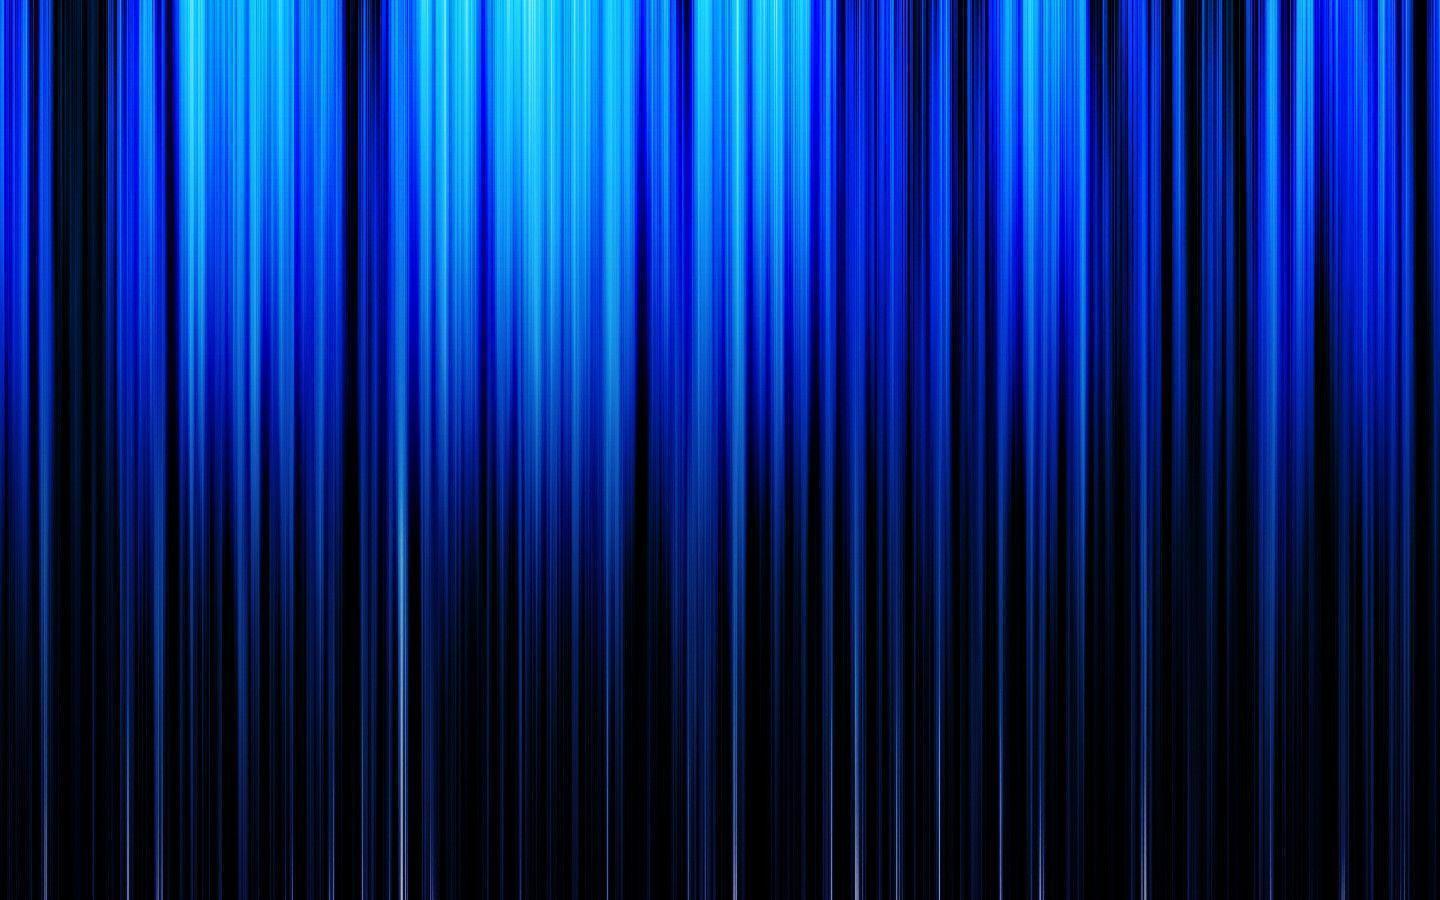 Cool Blue And Black Wallpaper